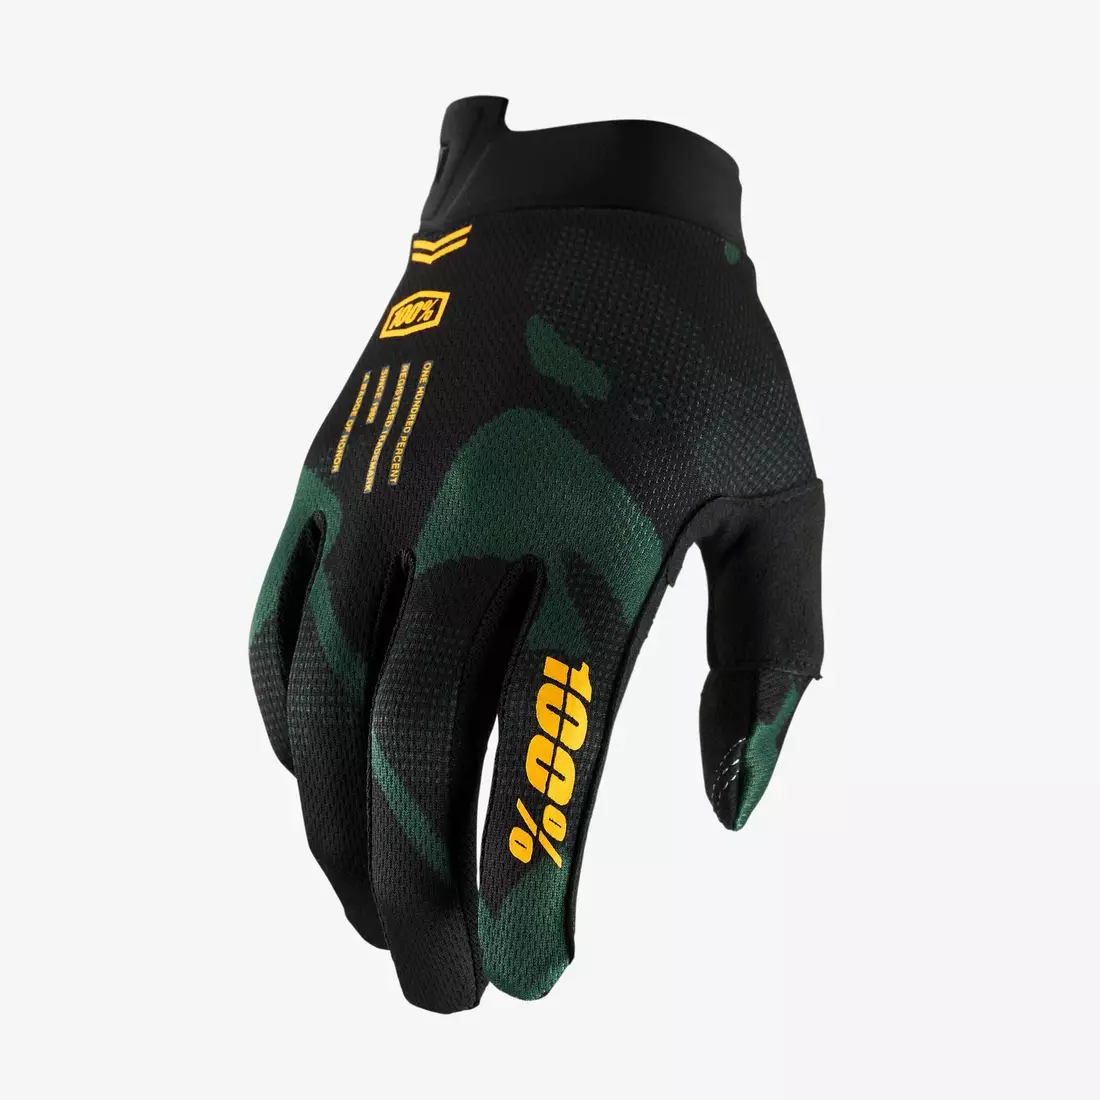 100% ITRACK Cycling gloves, black and yellow